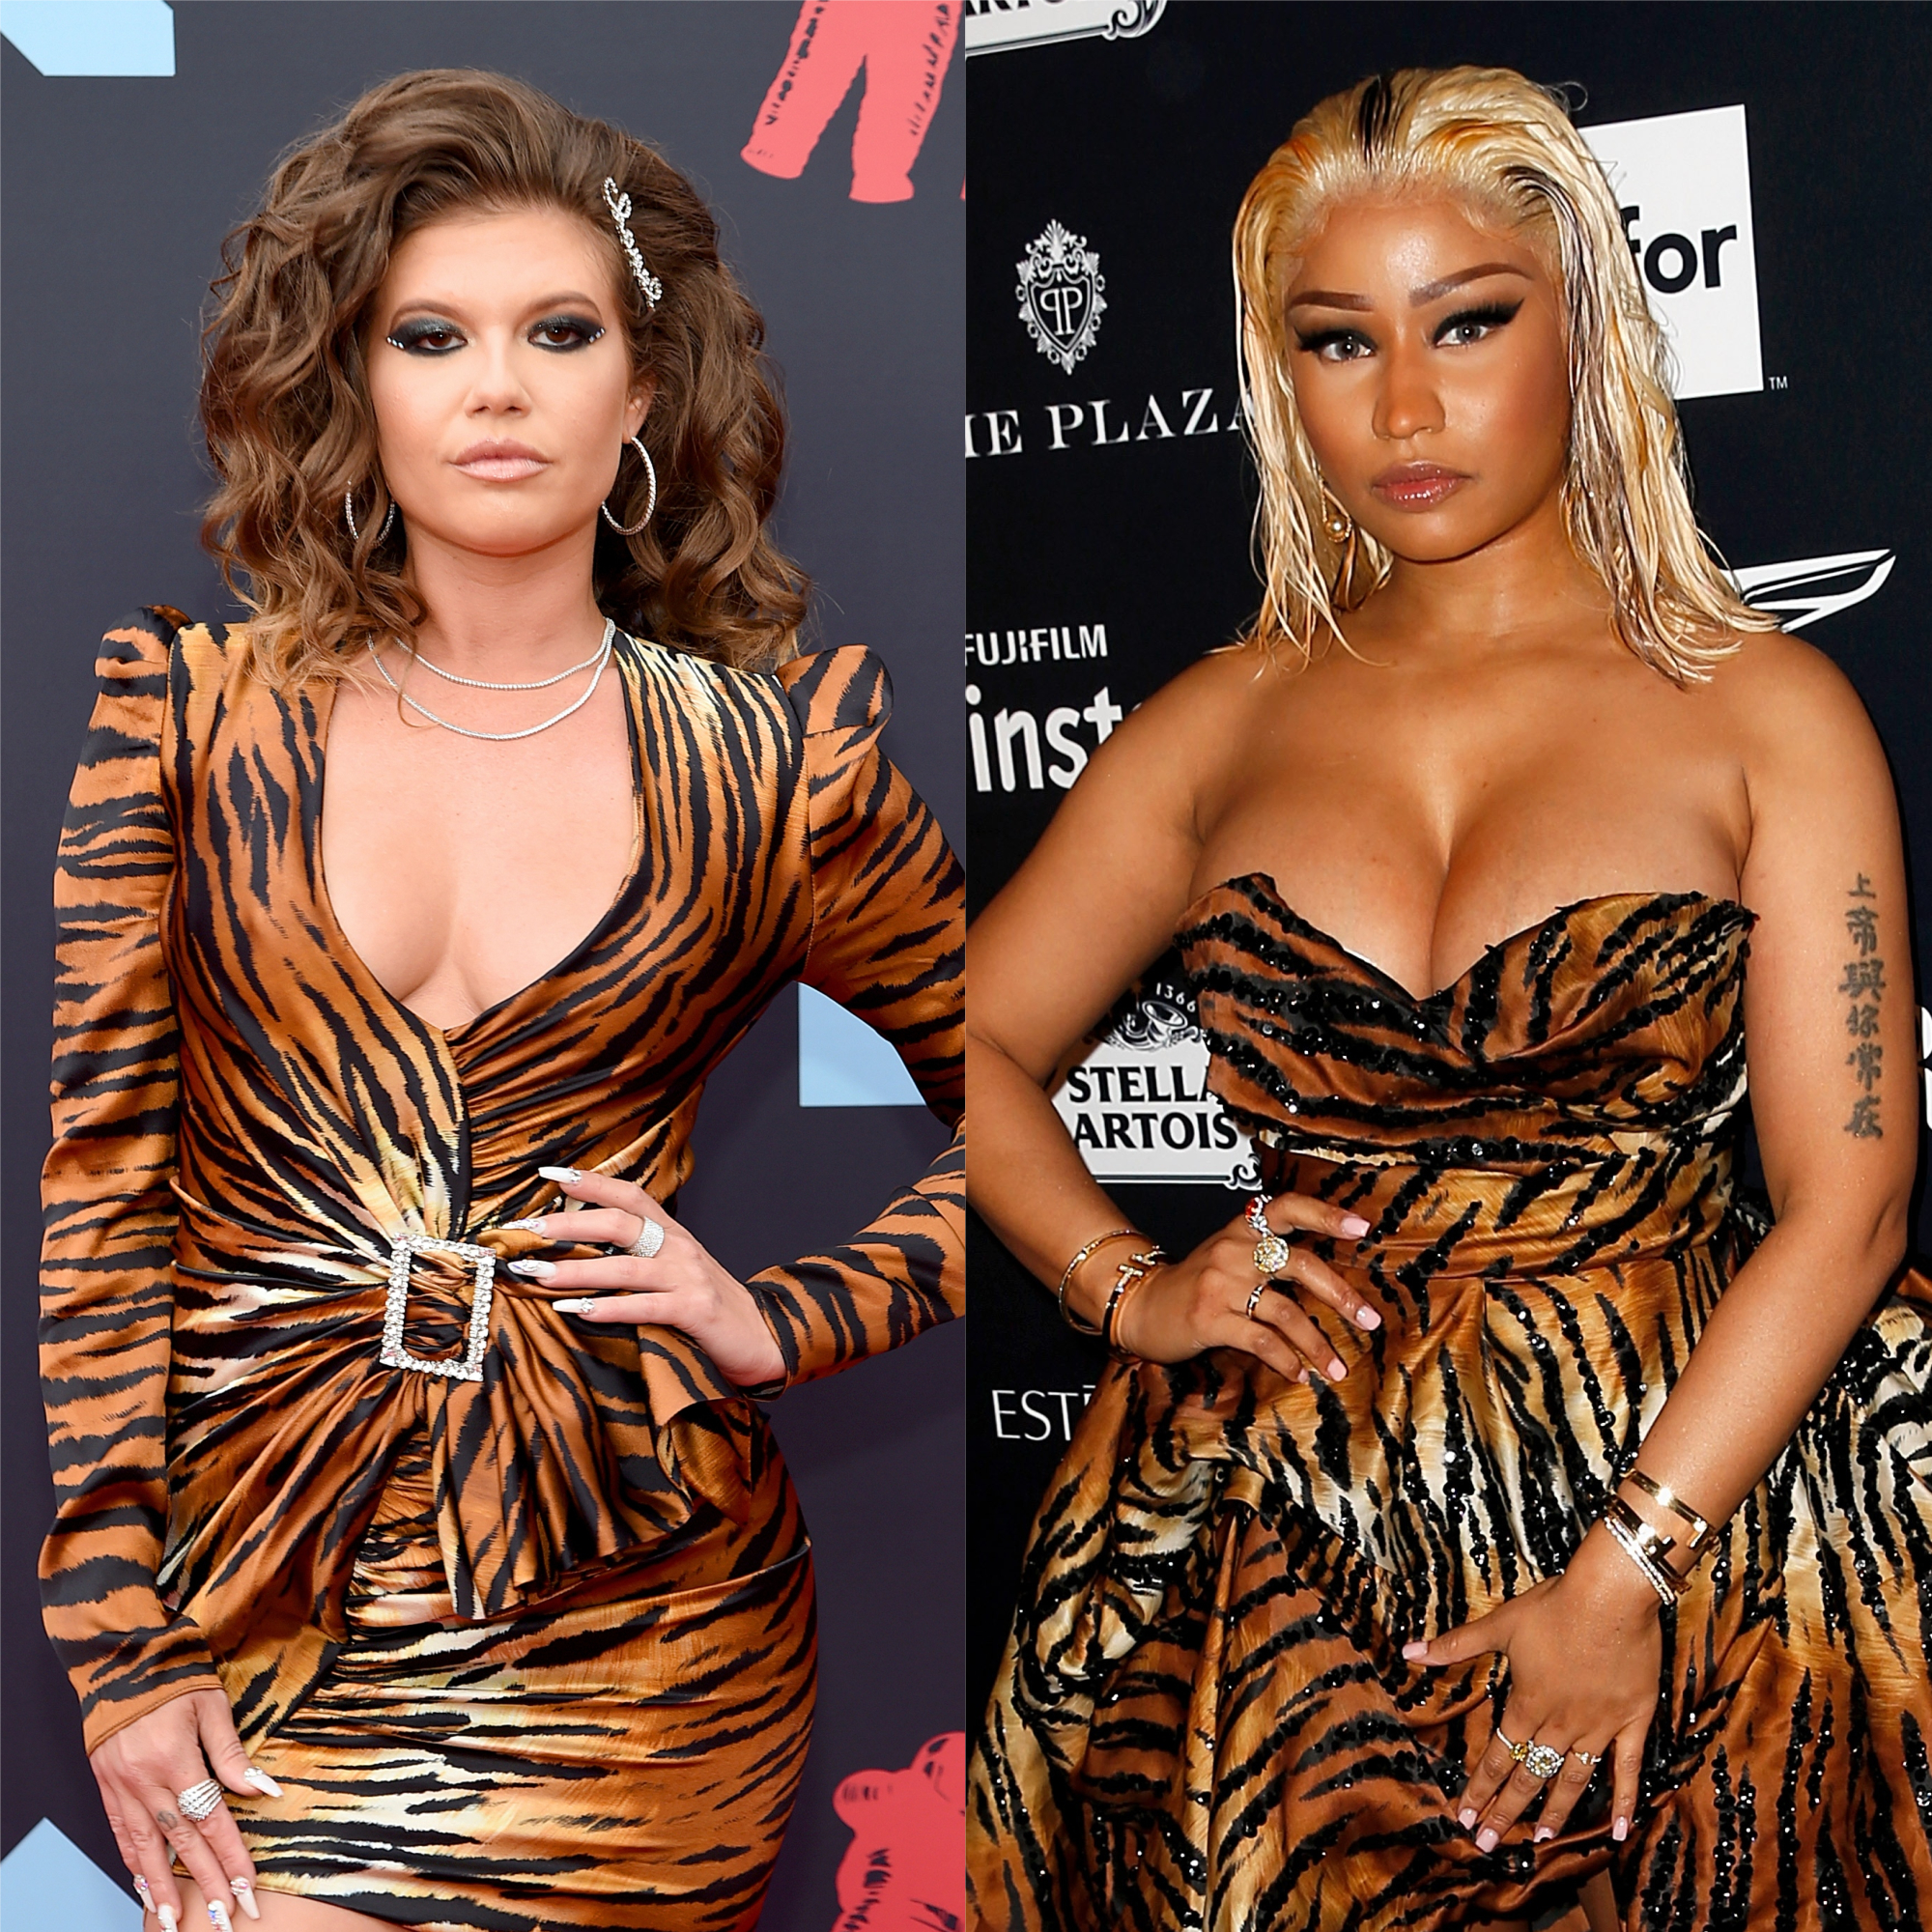 Chanel West Coast Blames Nicki Minaj For Stopping Her Bag With Lil